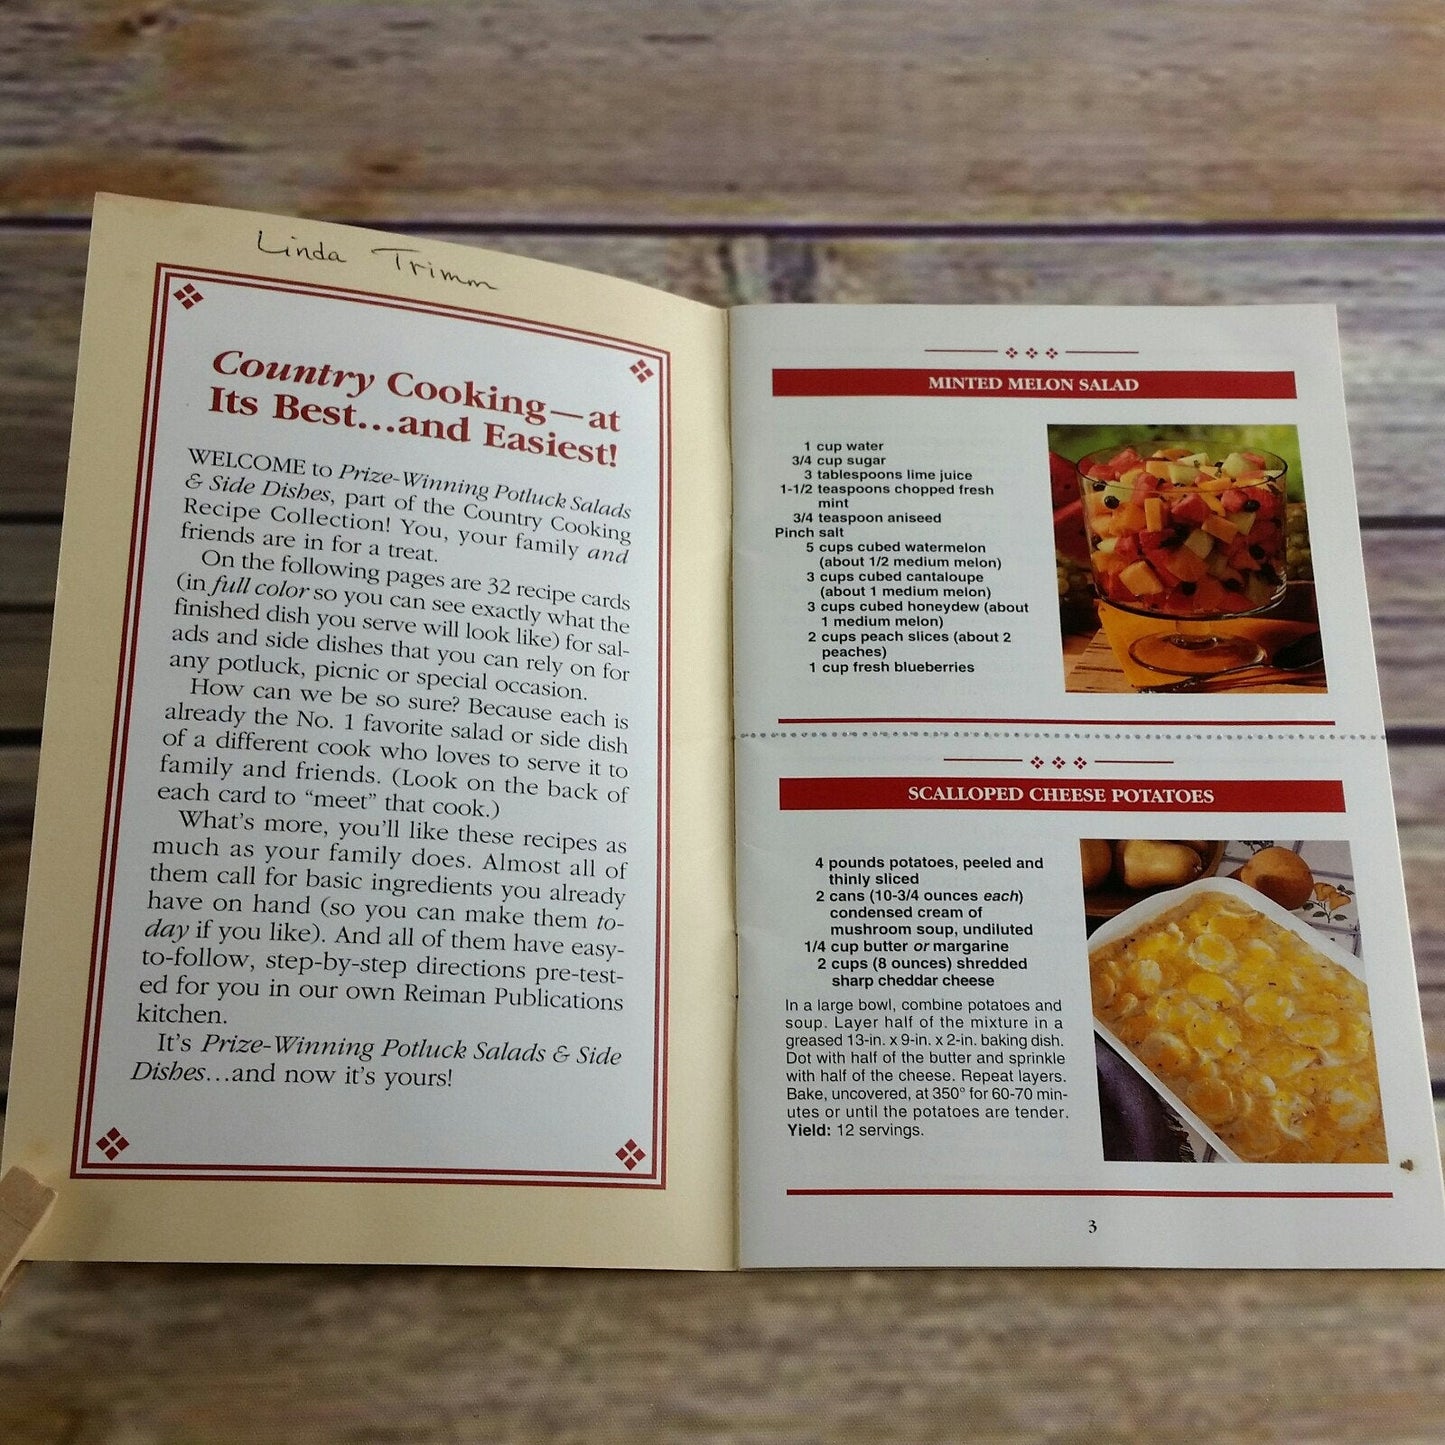 Vintage Cookbook The Country Cooking Recipe Collection Potluck Salads and Side Dishes Recipes 2000 Paperback Booklet